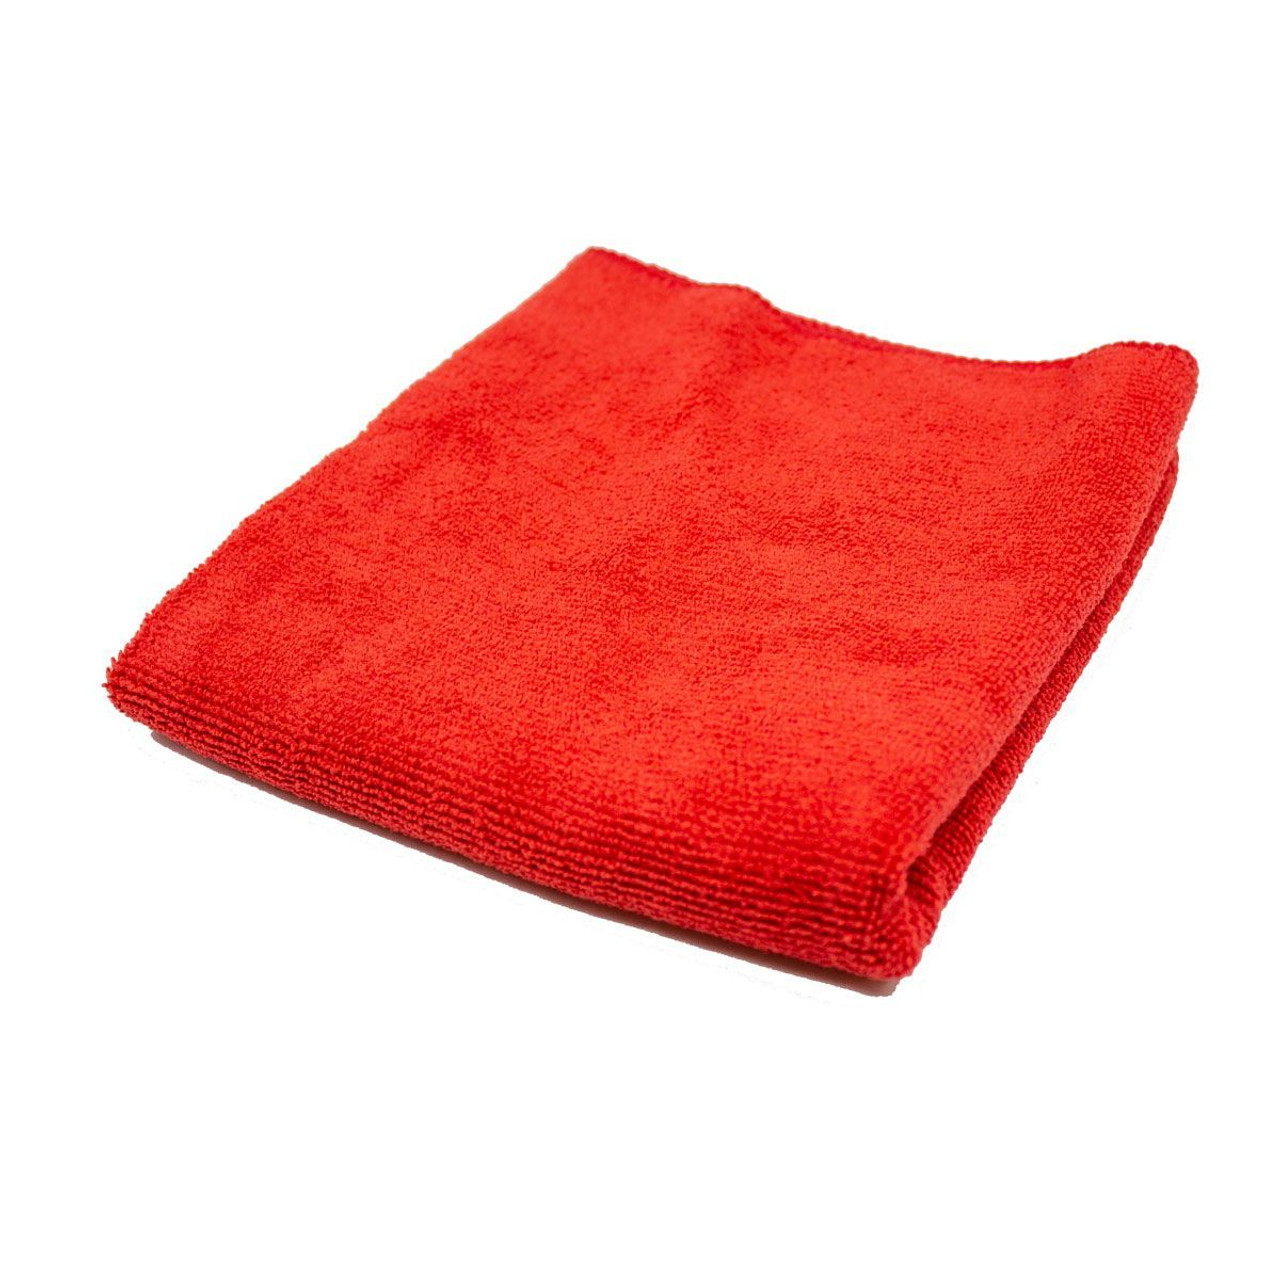 https://cdn11.bigcommerce.com/s-vo954a7pzm/images/stencil/1280x1280/products/275/566/cobra-scarlet-red-utility-towel-8__56415.1673552806.jpg?c=1